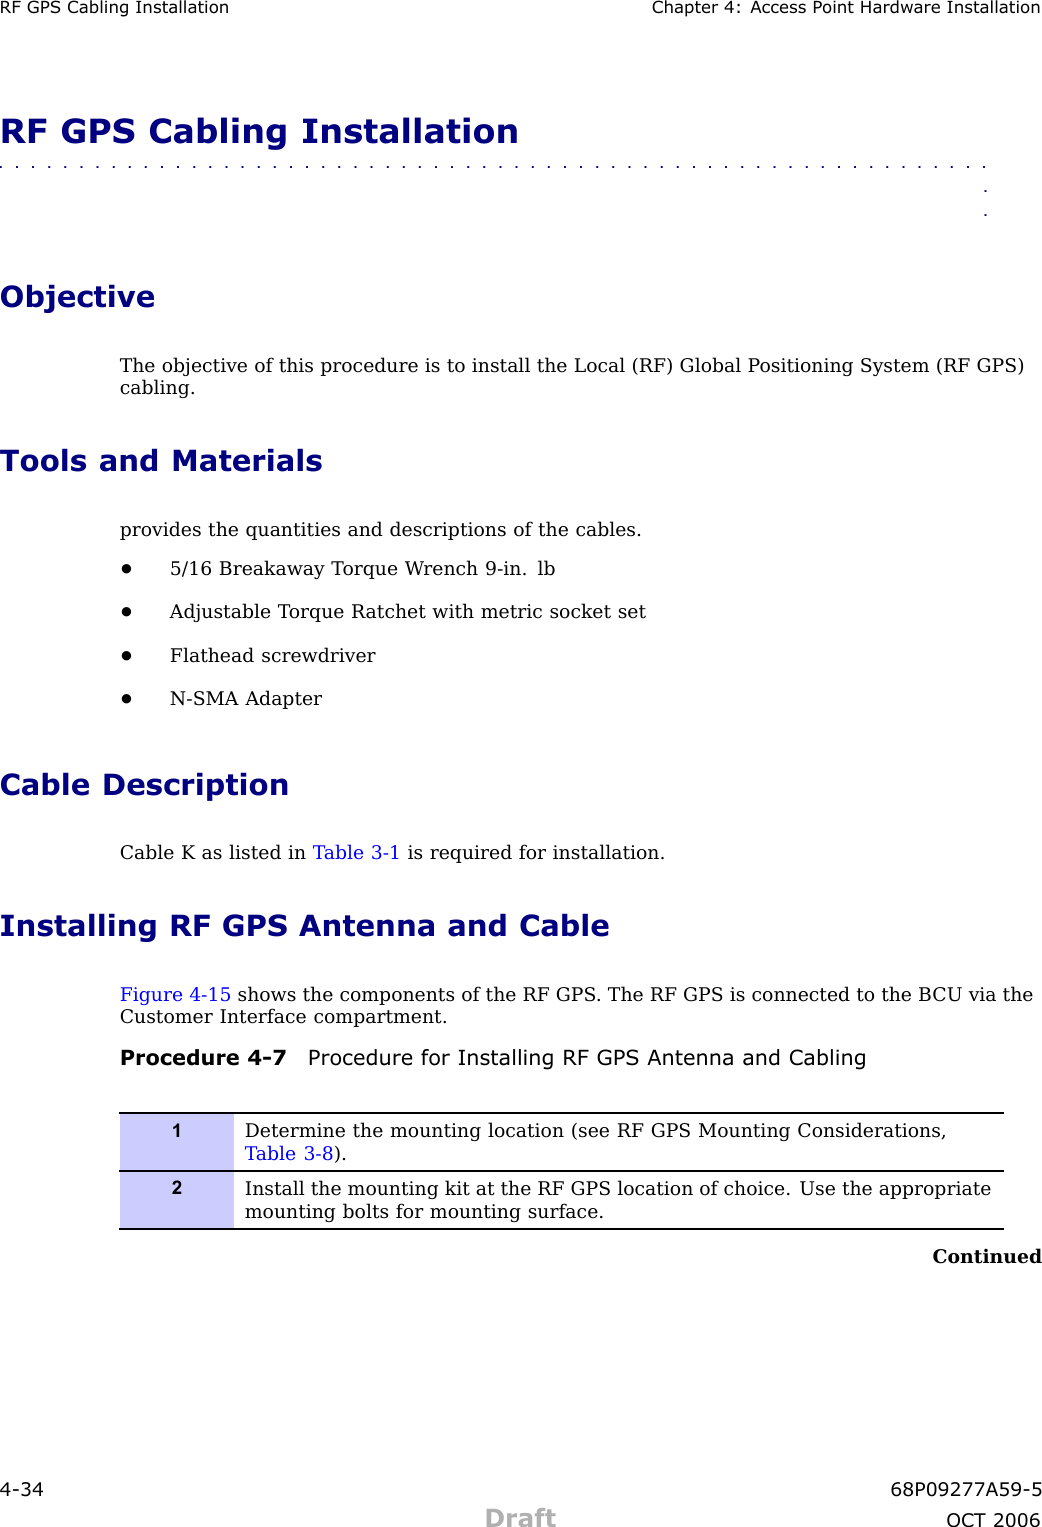 RF GPS Cabling Installation Chapter 4: Access P oint Hardw are InstallationRF GPS Cabling Installation■■■■■■■■■■■■■■■■■■■■■■■■■■■■■■■■■■■■■■■■■■■■■■■■■■■■■■■■■■■■■■■■ObjectiveThe objective of this procedure is to install the Local (RF) Global P ositioning System (RF GPS)cabling.Tools and Materialsprovides the quantities and descriptions of the cables.•5/16 Breakaway T orque W rench 9 -in. lb•Adjustable T orque R atchet with metric socket set•Flathead screwdriver•N -SMA AdapterCable DescriptionCable K as listed in T able 3 -1 is required for installation.Installing RF GPS Antenna and CableFigure 4 -15 shows the components of the RF GPS . The RF GPS is connected to the B CU via theCustomer Interface compartment.Procedure 4 -7 Procedure for Installing RF GPS Antenna and Cabling1Determine the mounting location (see RF GPS Mounting Considerations,T able 3-8 ).2Install the mounting kit at the RF GPS location of choice. Use the appropriatemounting bolts for mounting surface.Continued4 -34 68P09277A59 -5Draft OCT 2006